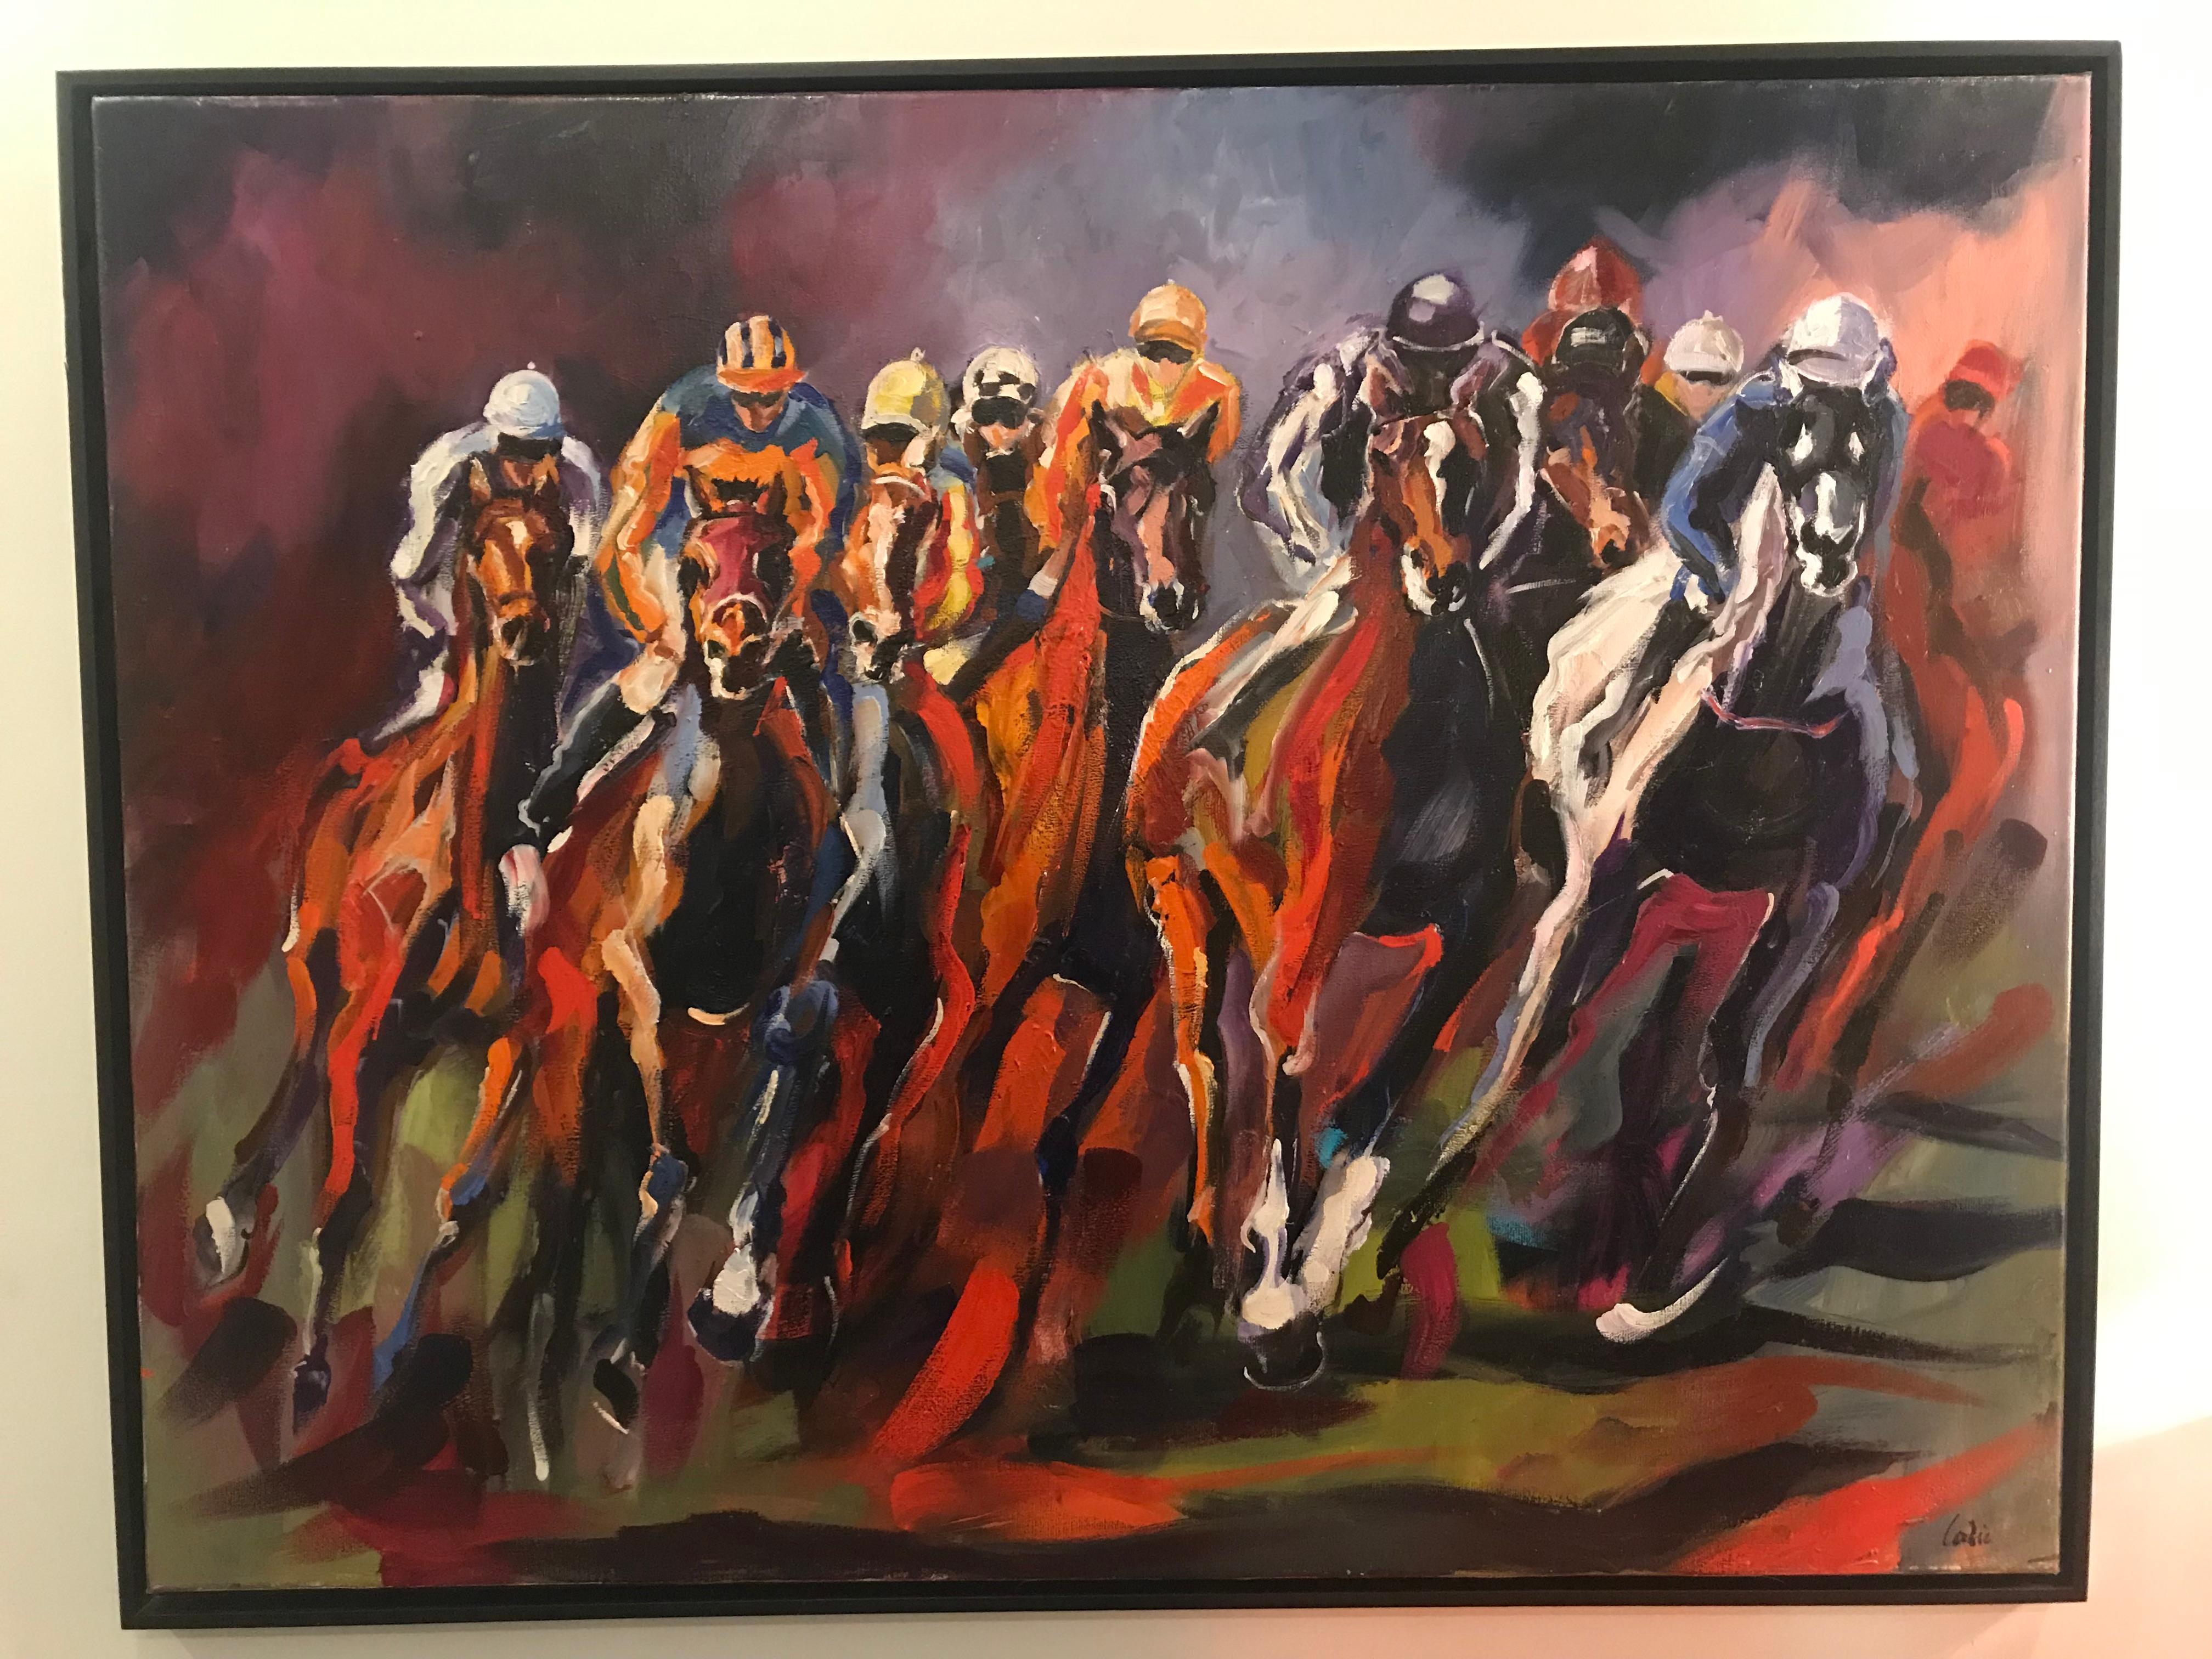  A day at the Races - Painting by Sonia Lalic